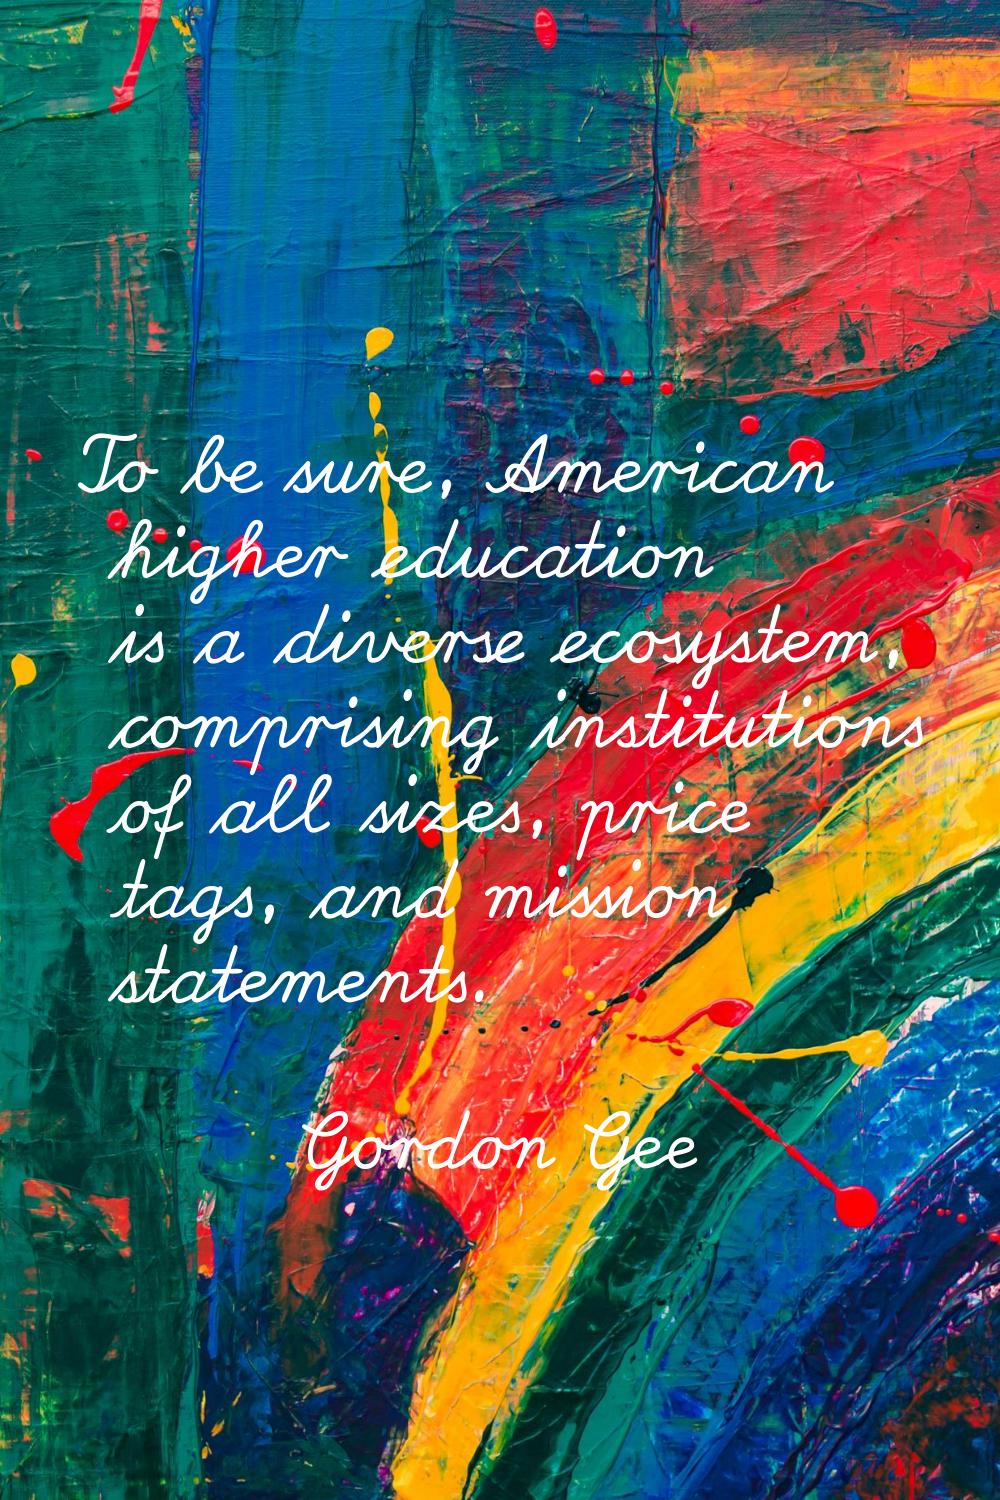 To be sure, American higher education is a diverse ecosystem, comprising institutions of all sizes,